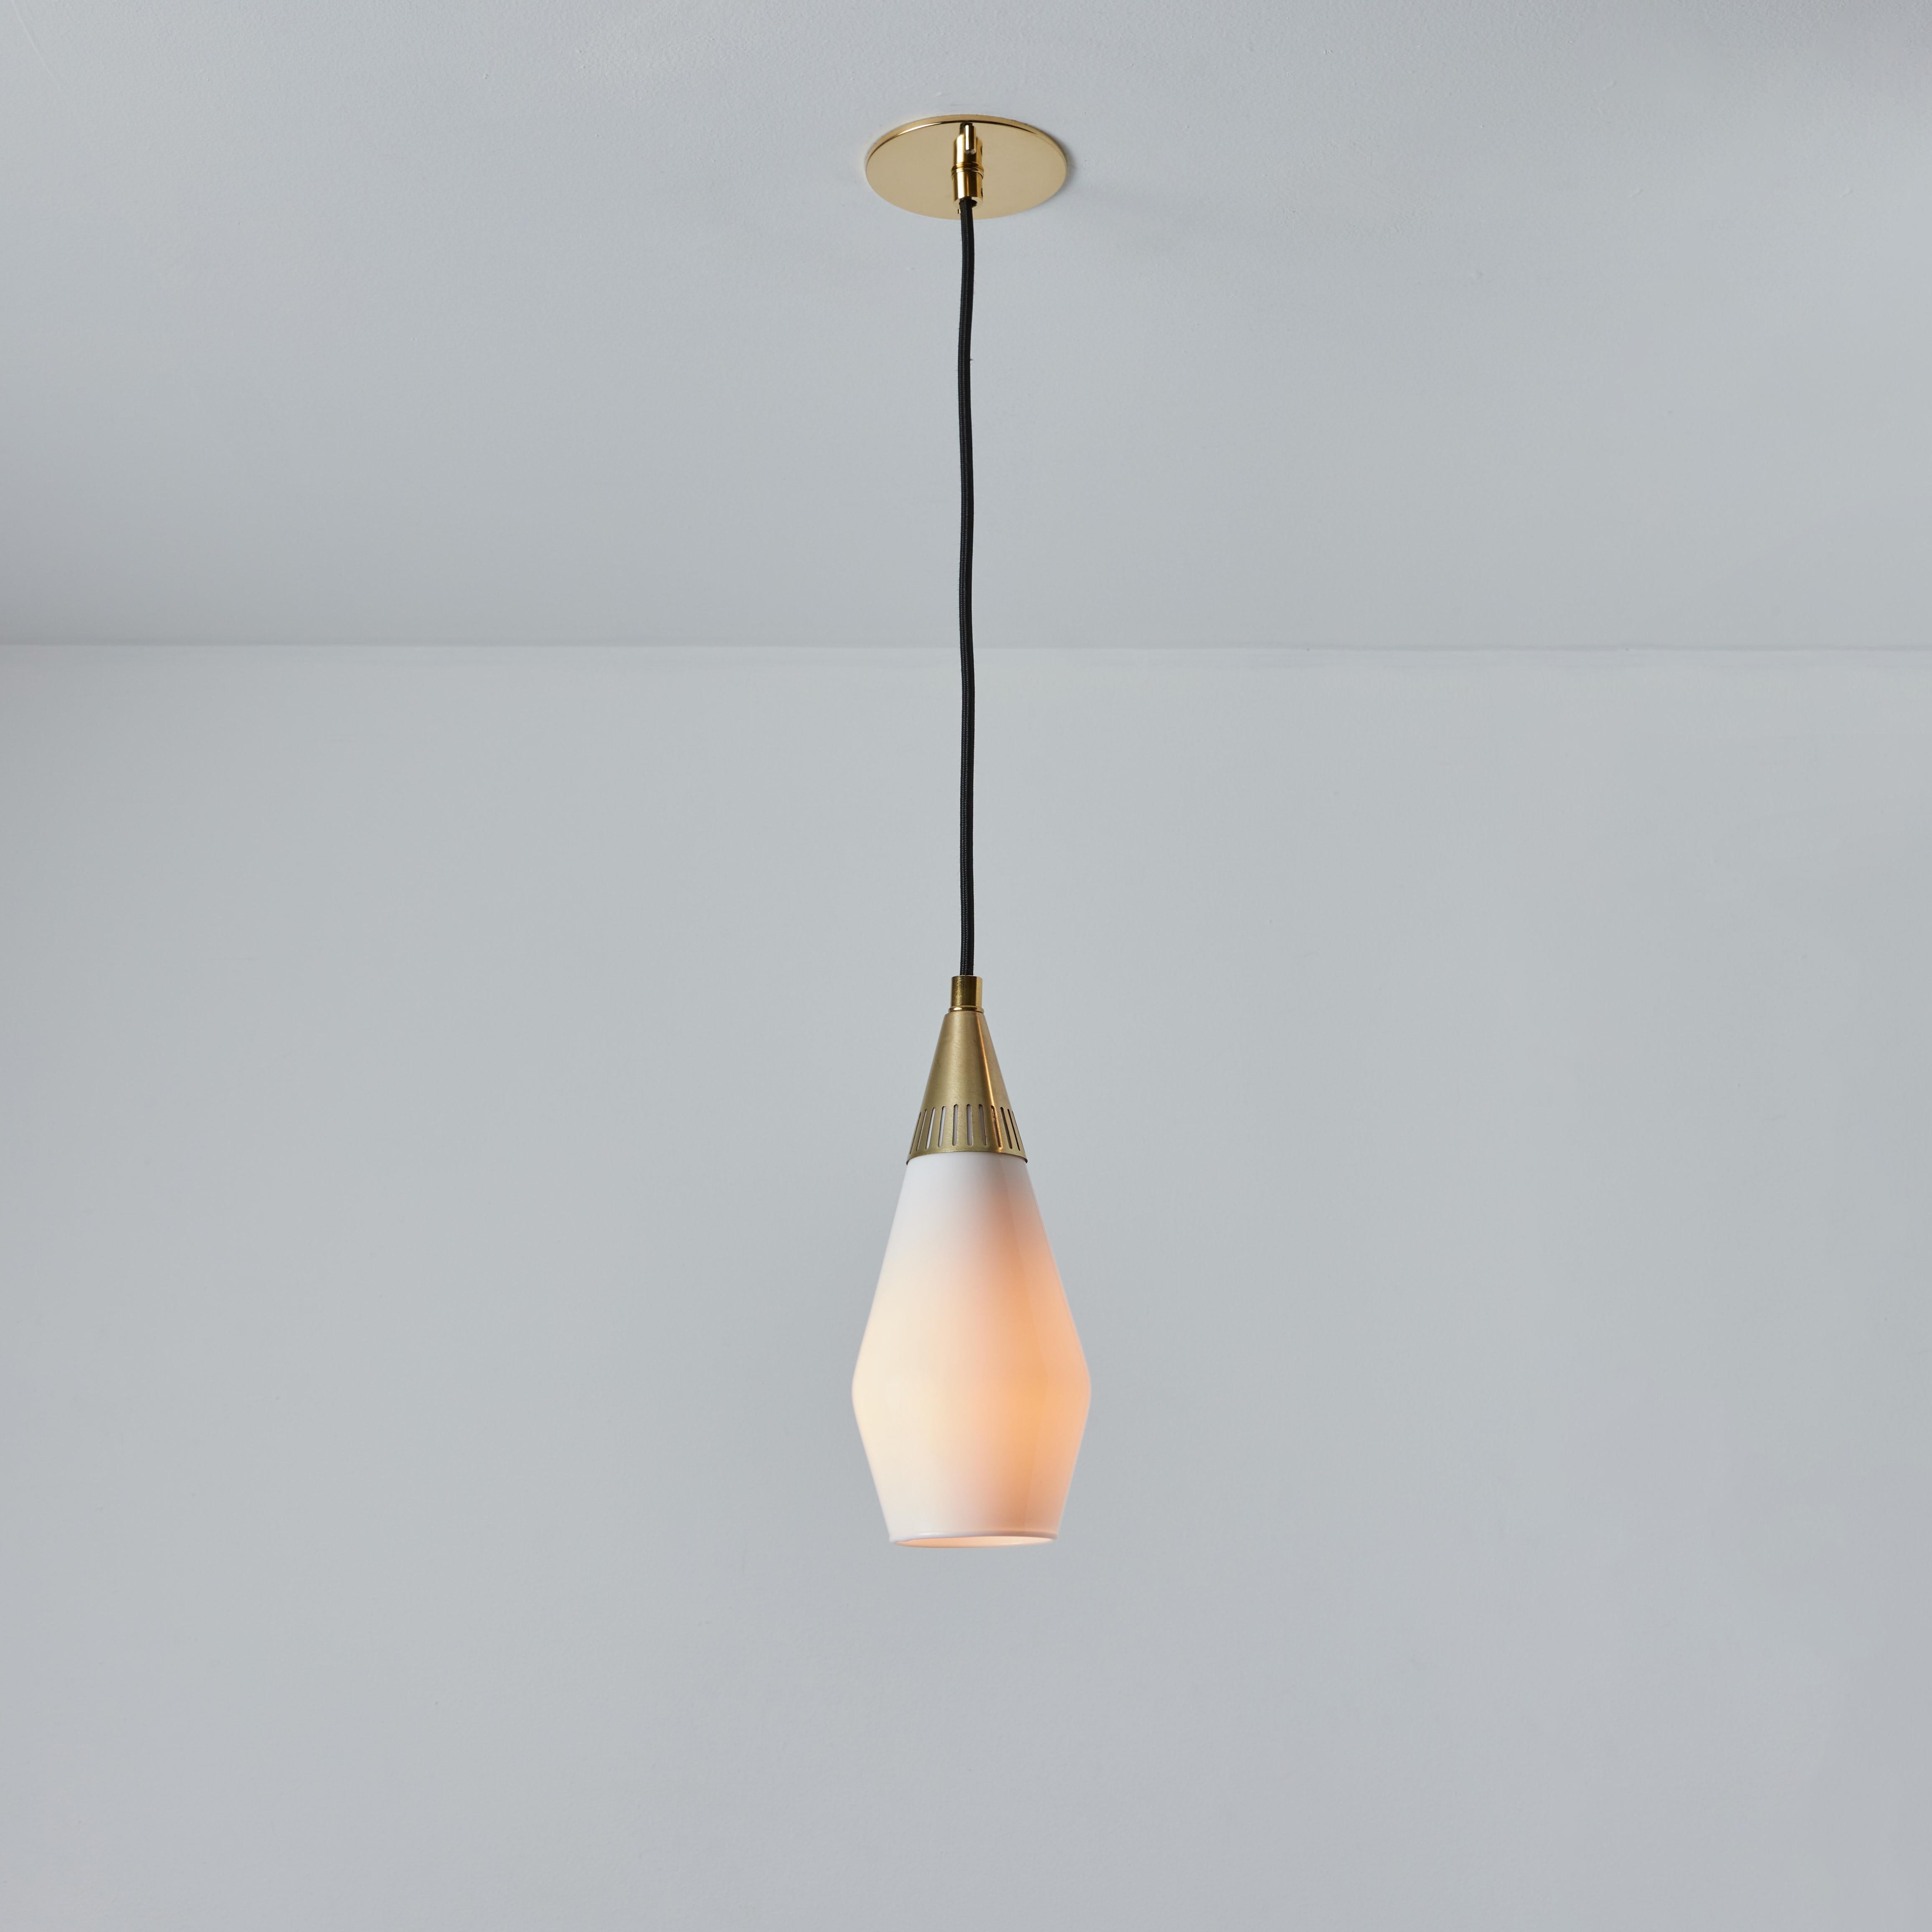 1960s Opaline glass and brass geometric pendant lamp attributed to Mauri Almari. Executed in glossy opaline glass and brass with black cloth cord and custom fabricated period style brass canopy for mounting over a standard American j-box. Highly